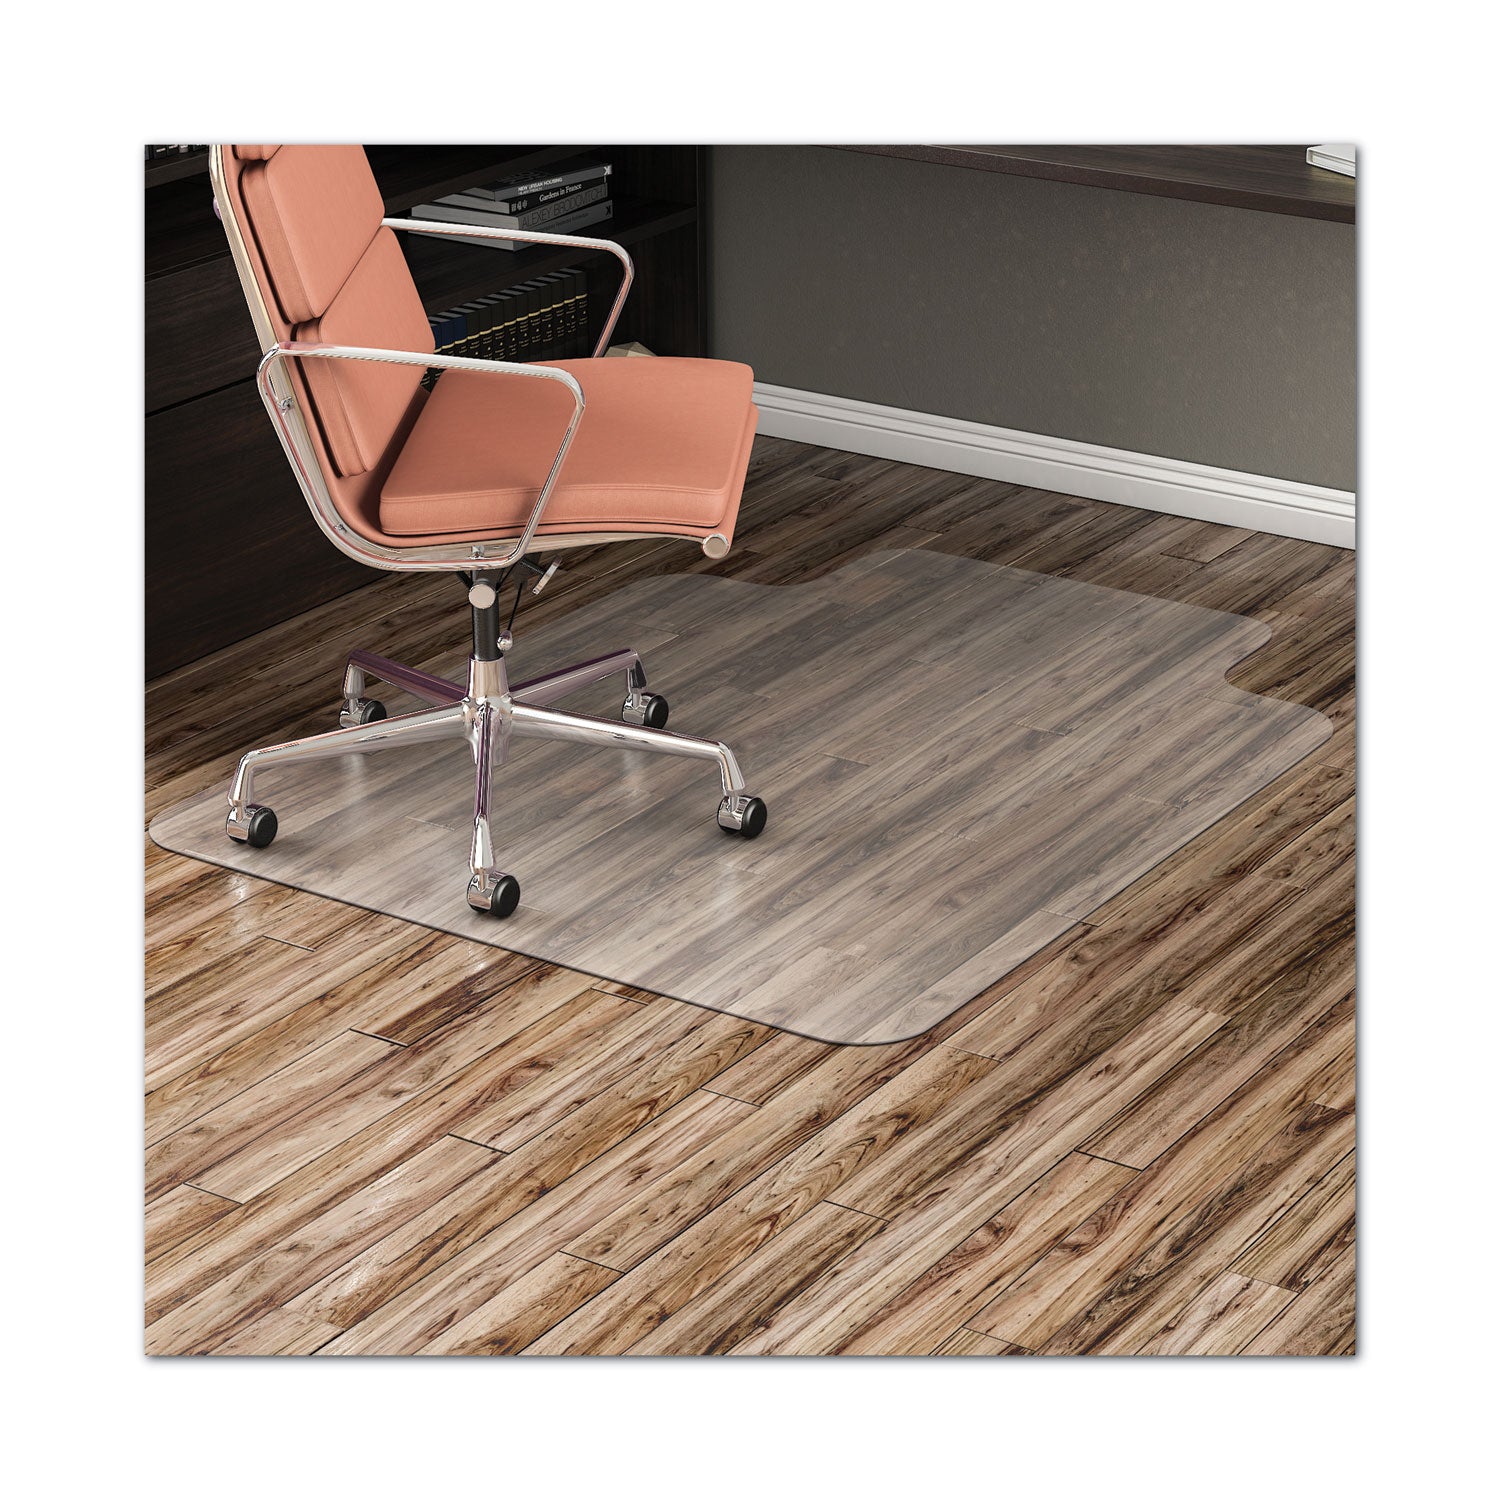 EconoMat All Day Use Chair Mat for Hard Floors, Flat Packed, 45 x 53, Wide Lipped, Clear - 3